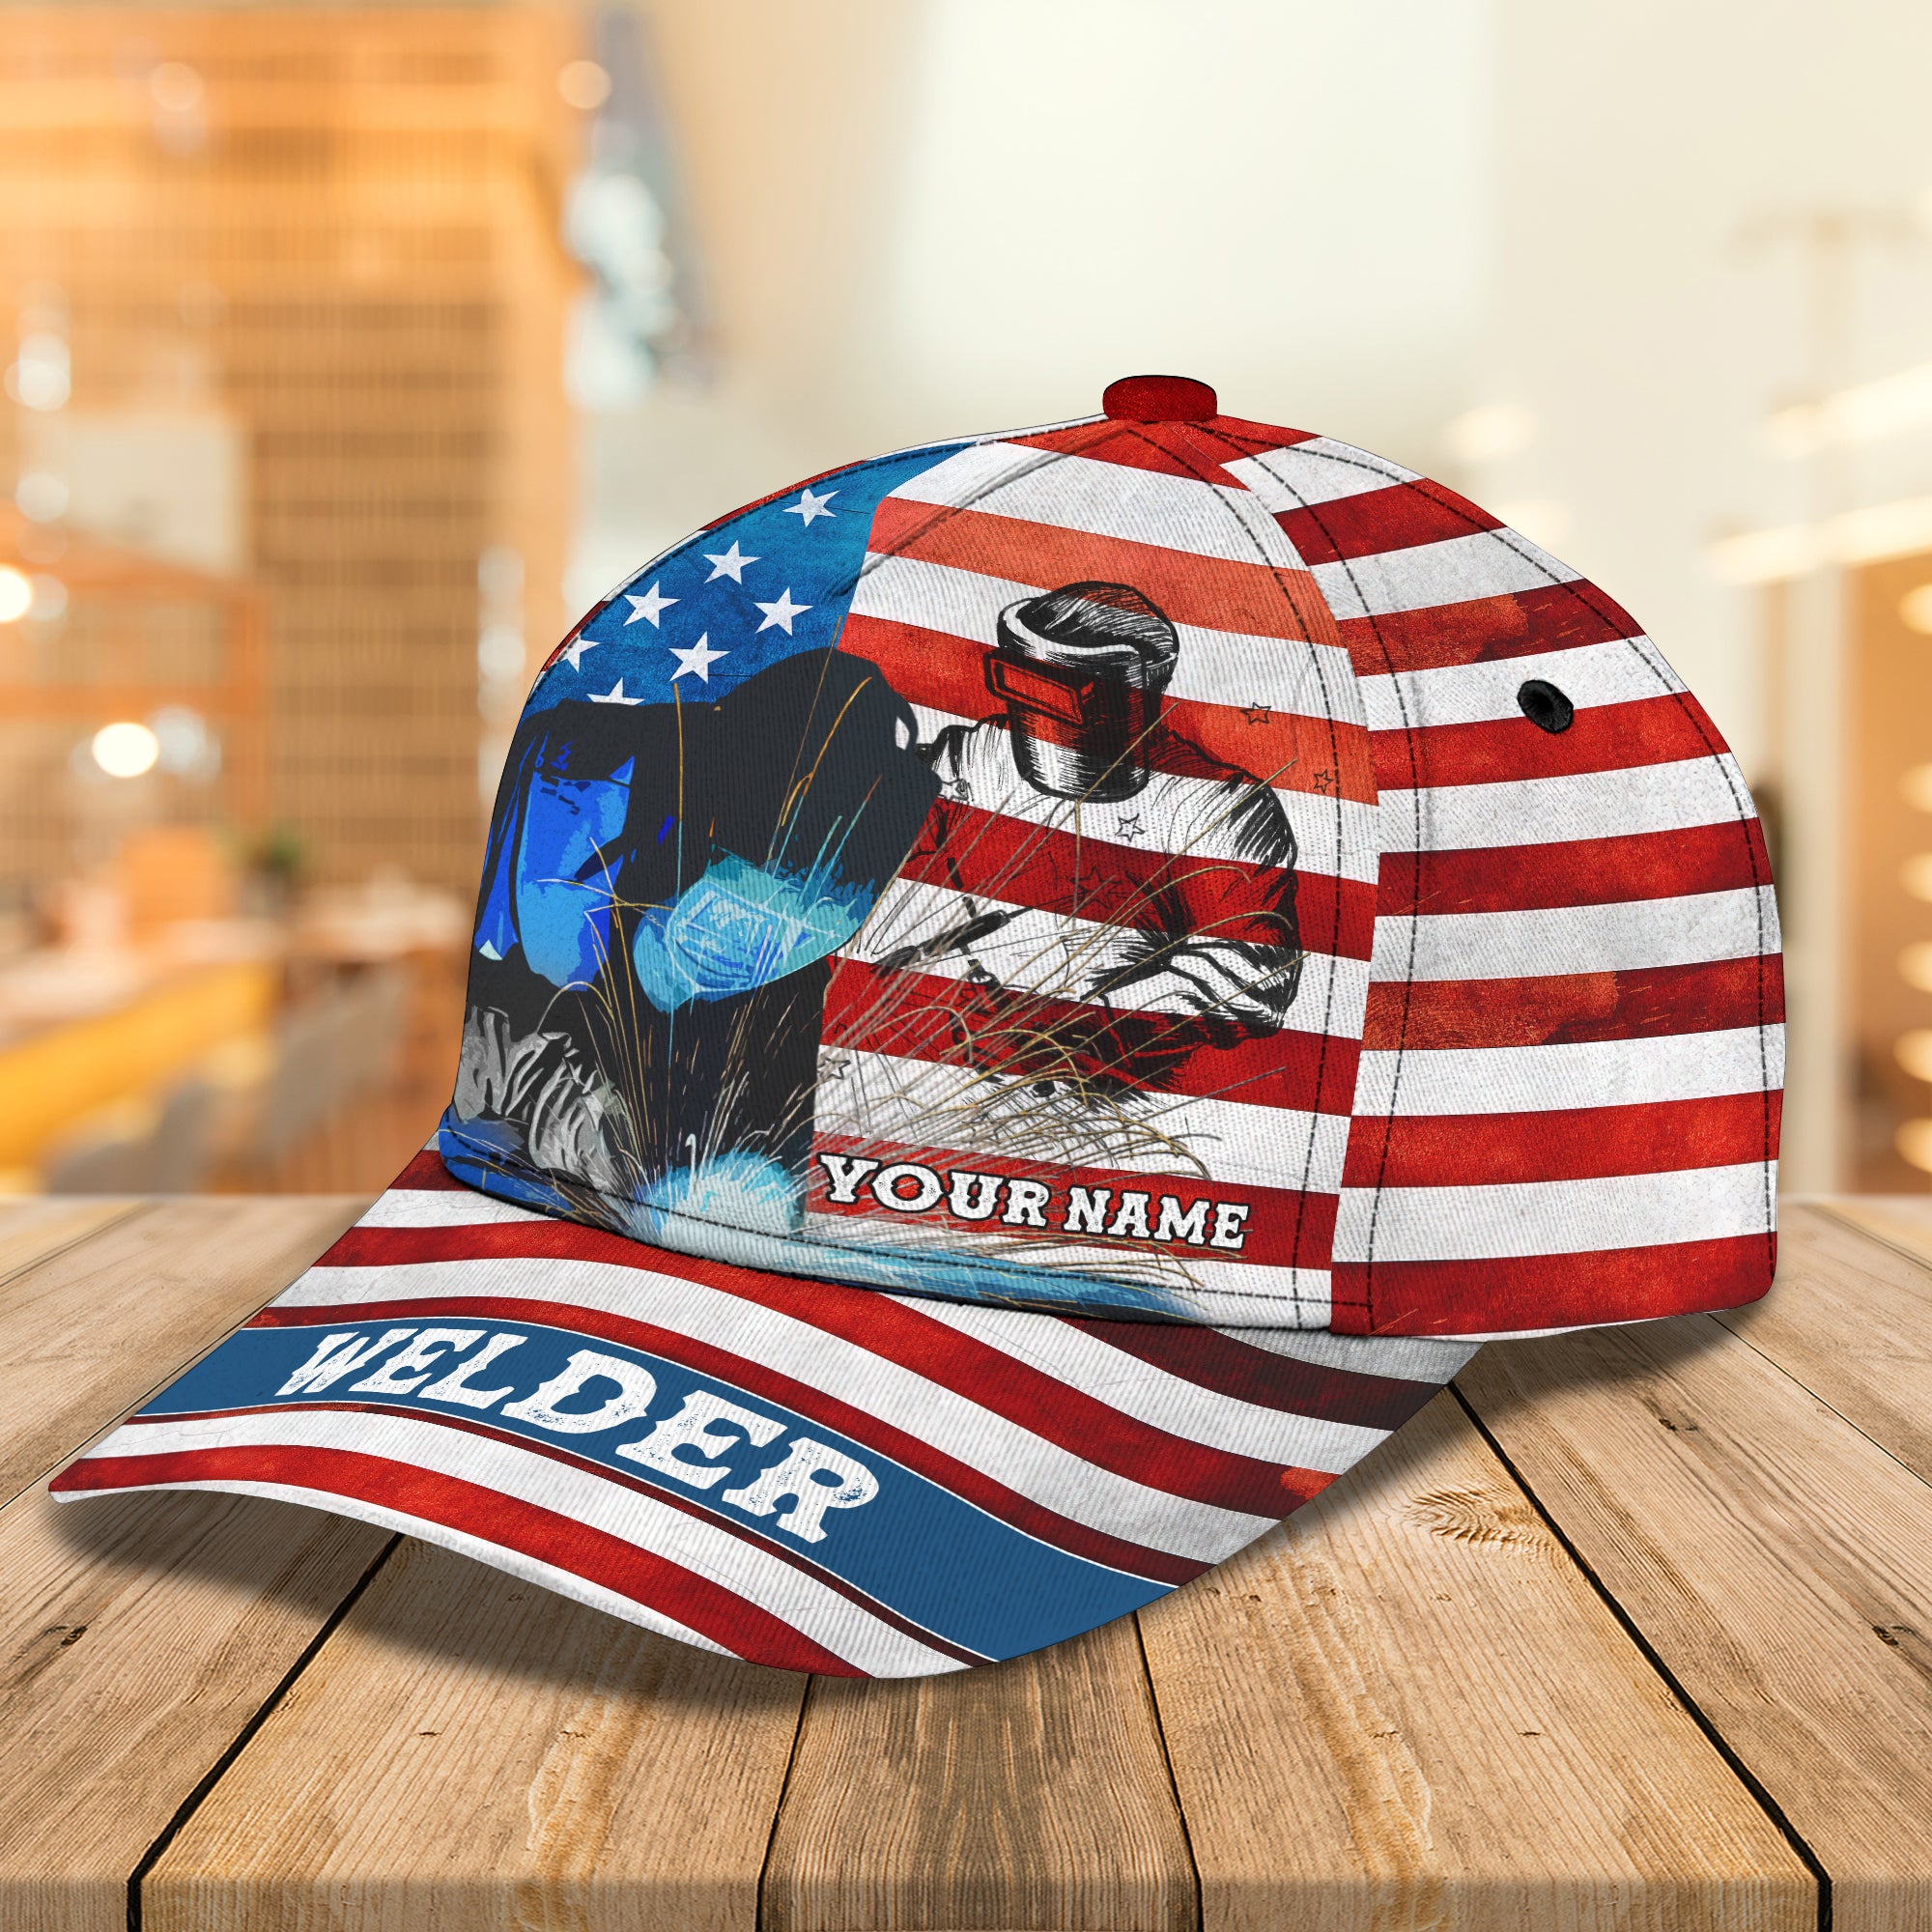 Welder - Personalized Name Cap - Tra96